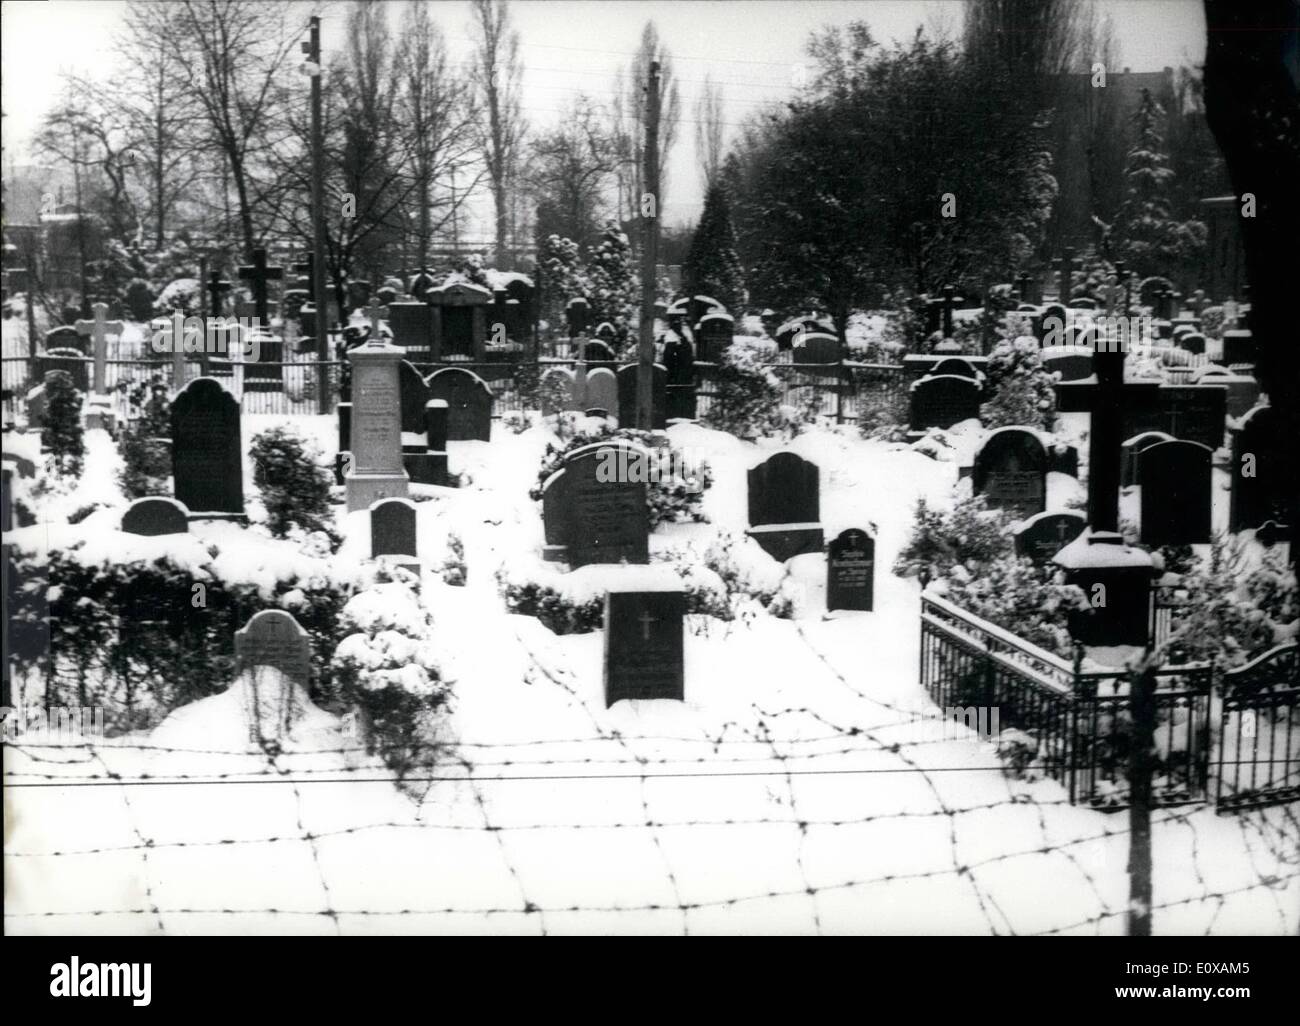 Nov. 11, 1965 - Till this day: The people of Berlin had no chance to visit their dead relatives at the cemeteries in East-Berlin in the ''Liesen-street''. No success had been in the discussions about the permits, which enabled the people of Berlin to visit their relatives in the East-Sector how it had happened some time ago. all people hope that they could see their relatives at Christmas again, but nobody knows whether it would be possible. Stock Photo